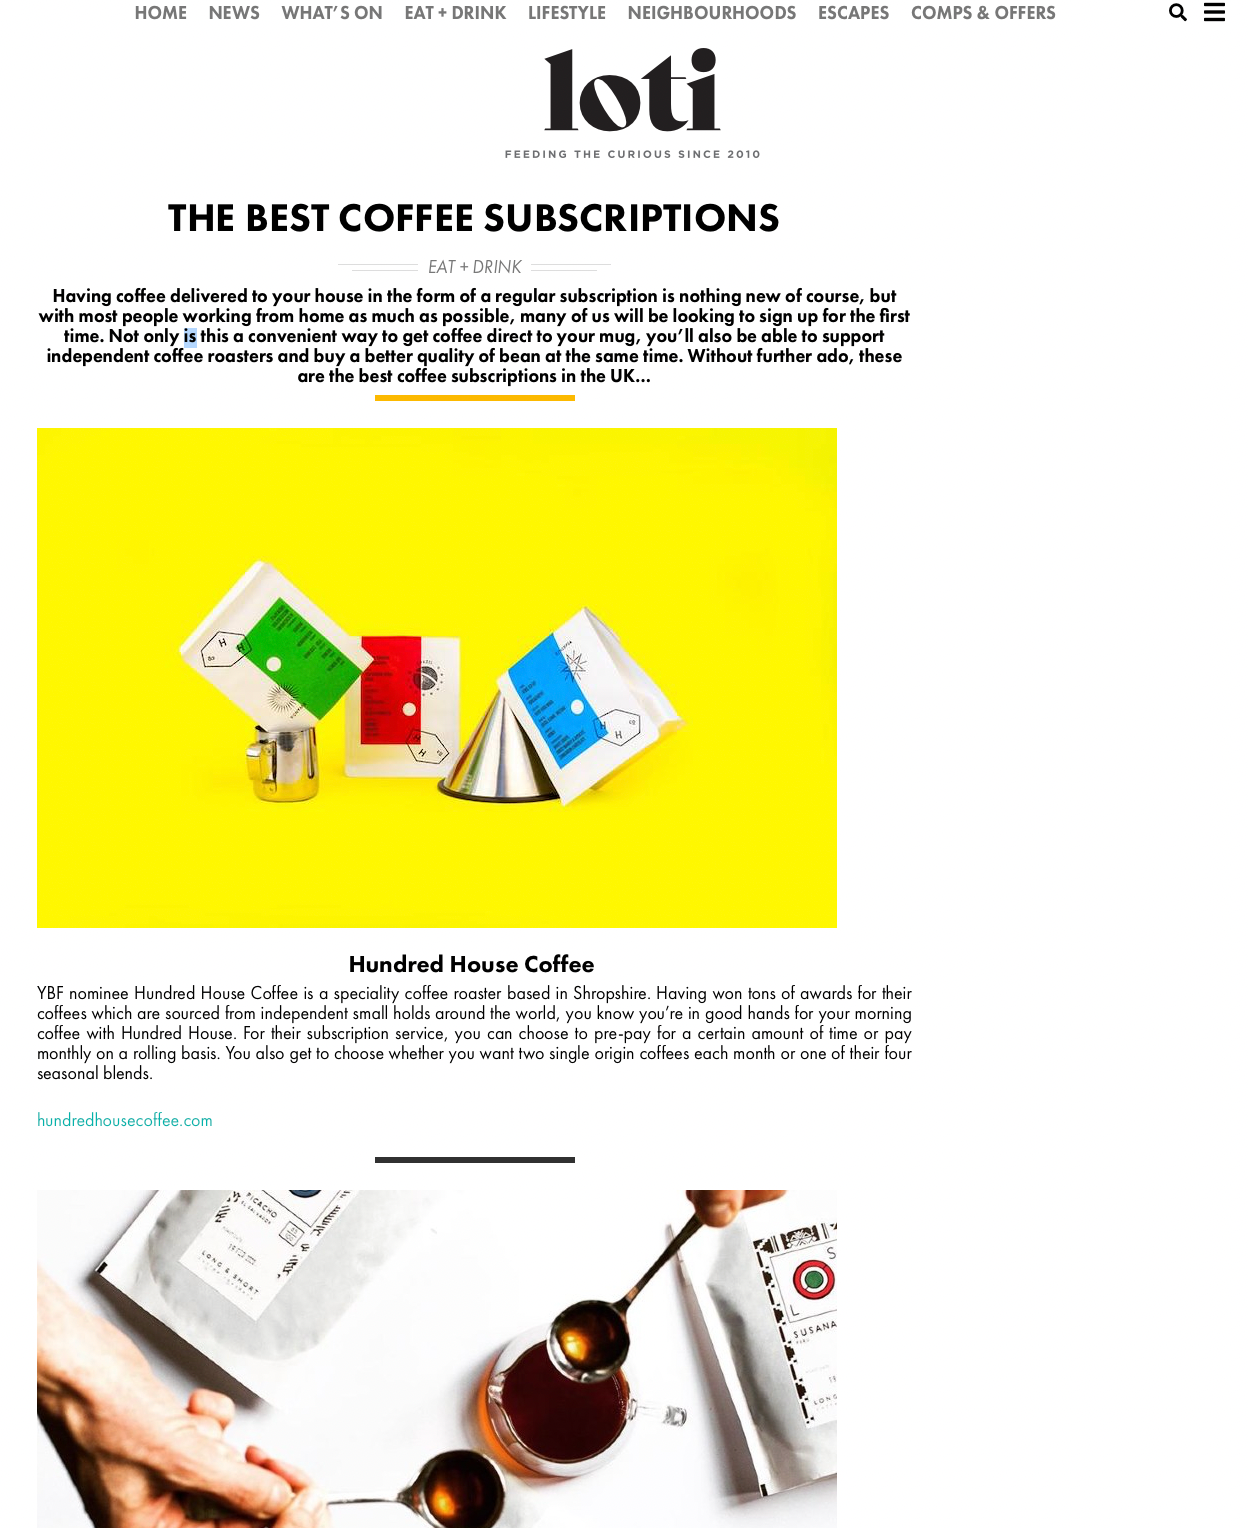 London on the Inside, The Best Coffee Subscriptions, January 2022